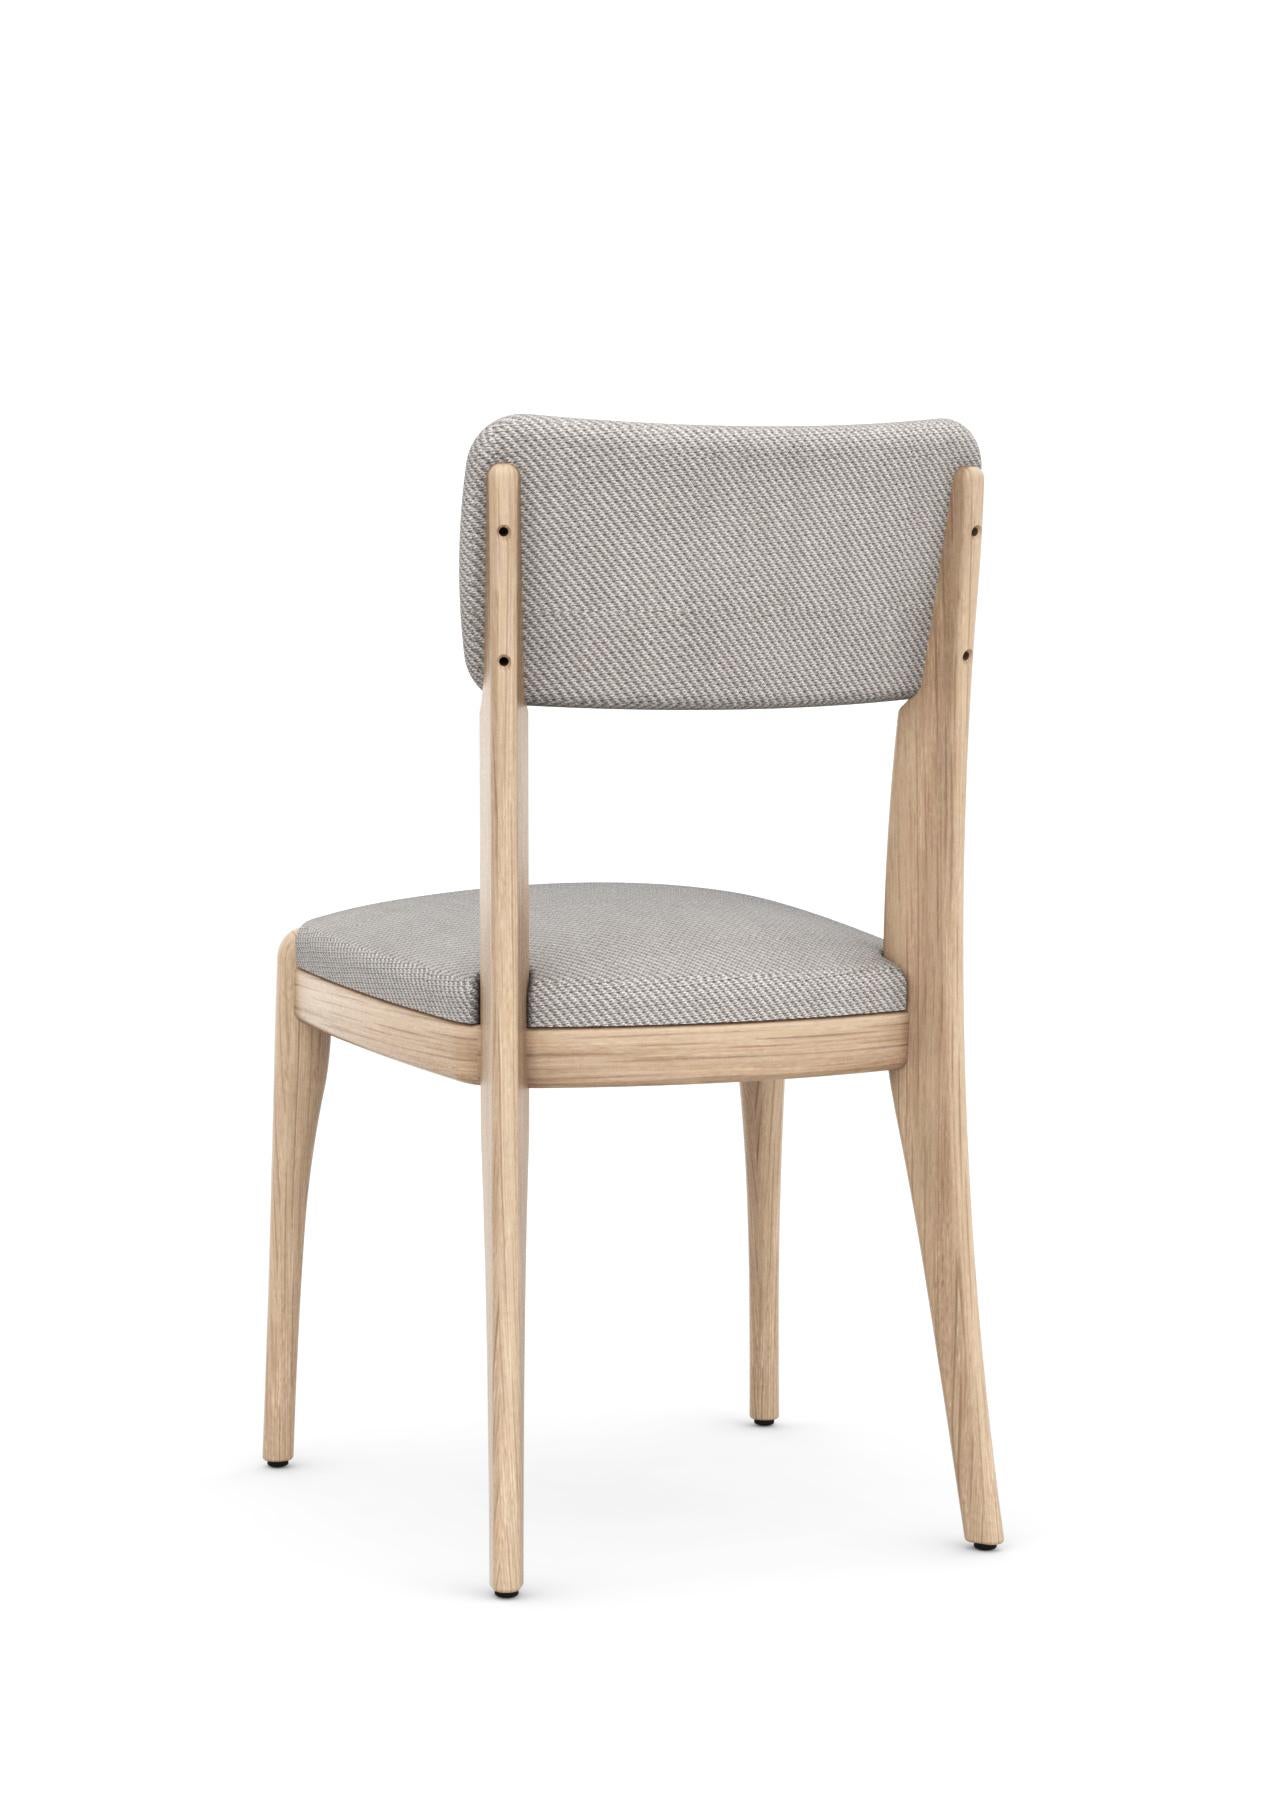 Dutch Revised Finchdean – solid oak dining chair